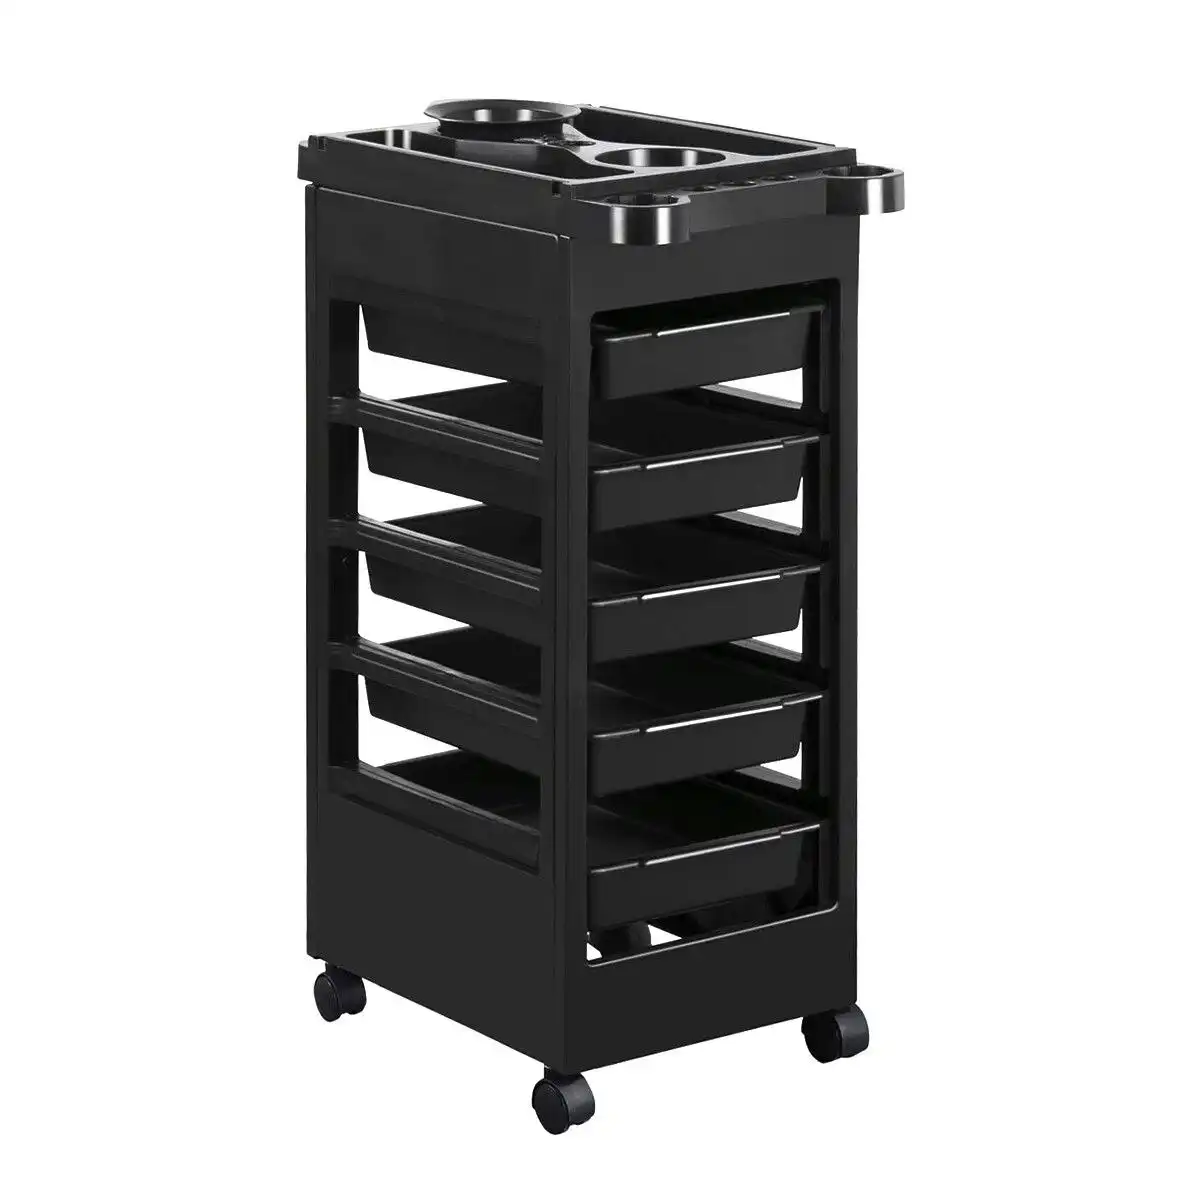 Ausway Hairdressing Trolley Storage Rolling Tool Cart Salon Furniture on Wheels 6 Tiers 5 Tray